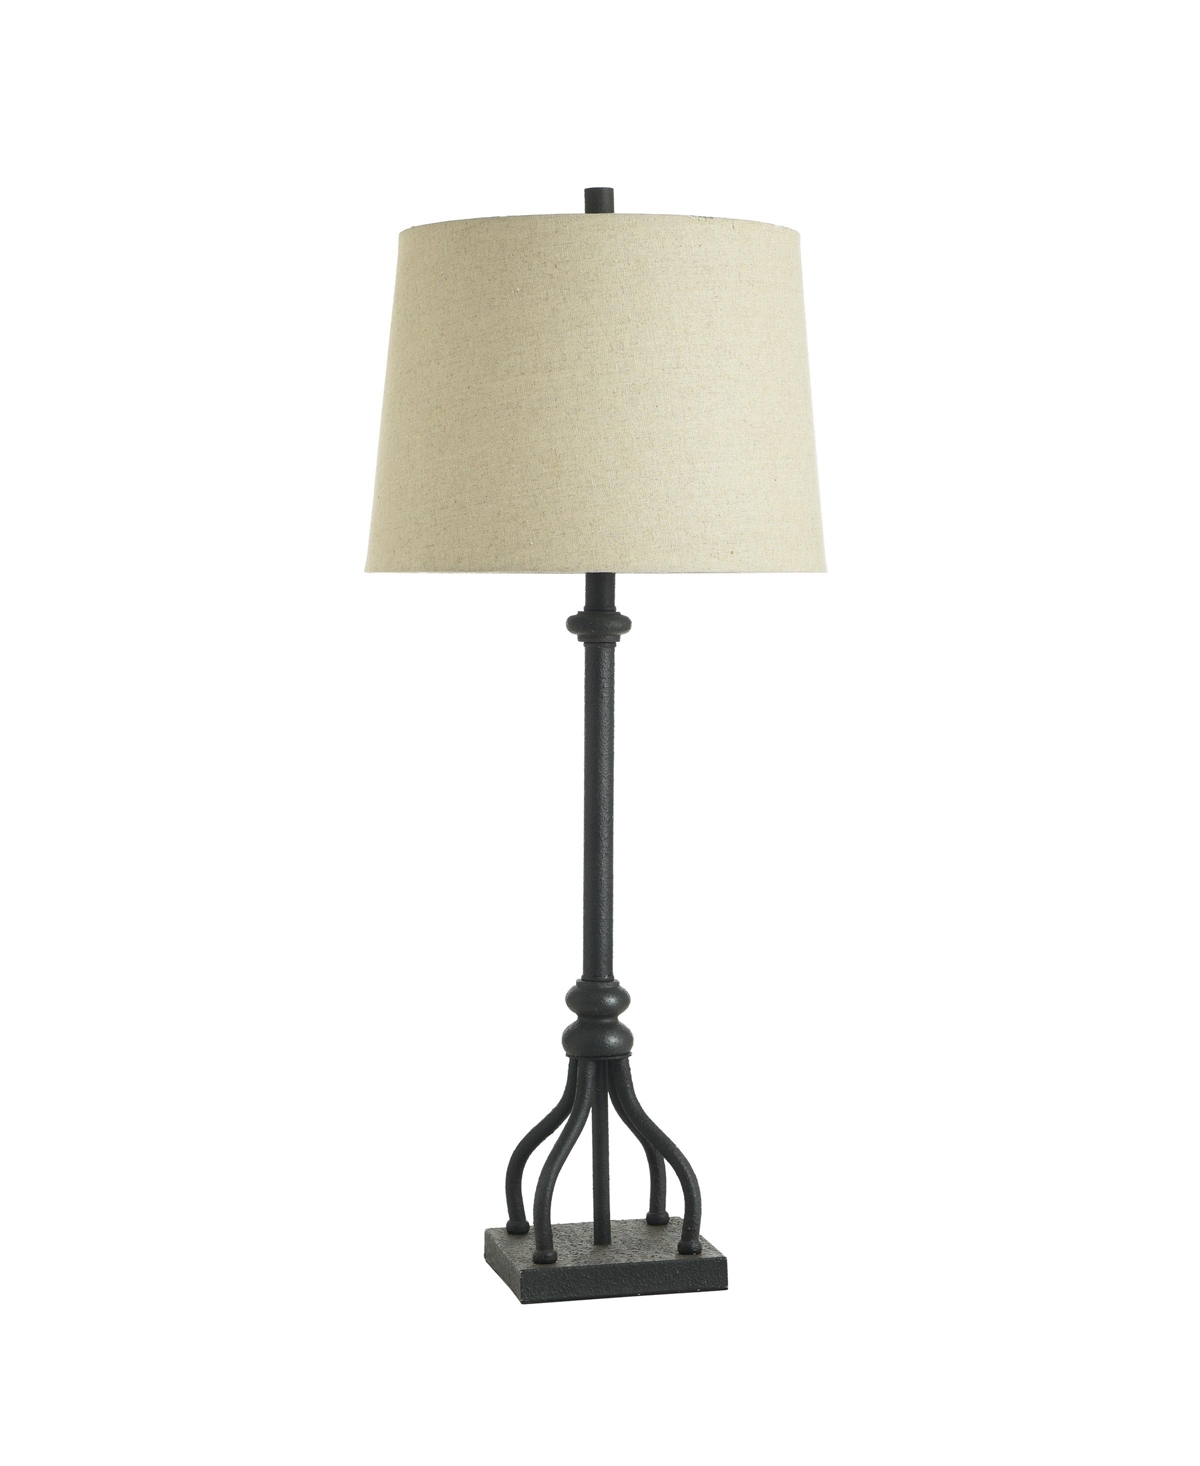 Stylecraft Home Collection 21.75" Industrial Classic Metal Design Table Lamp In Sanded Bronze